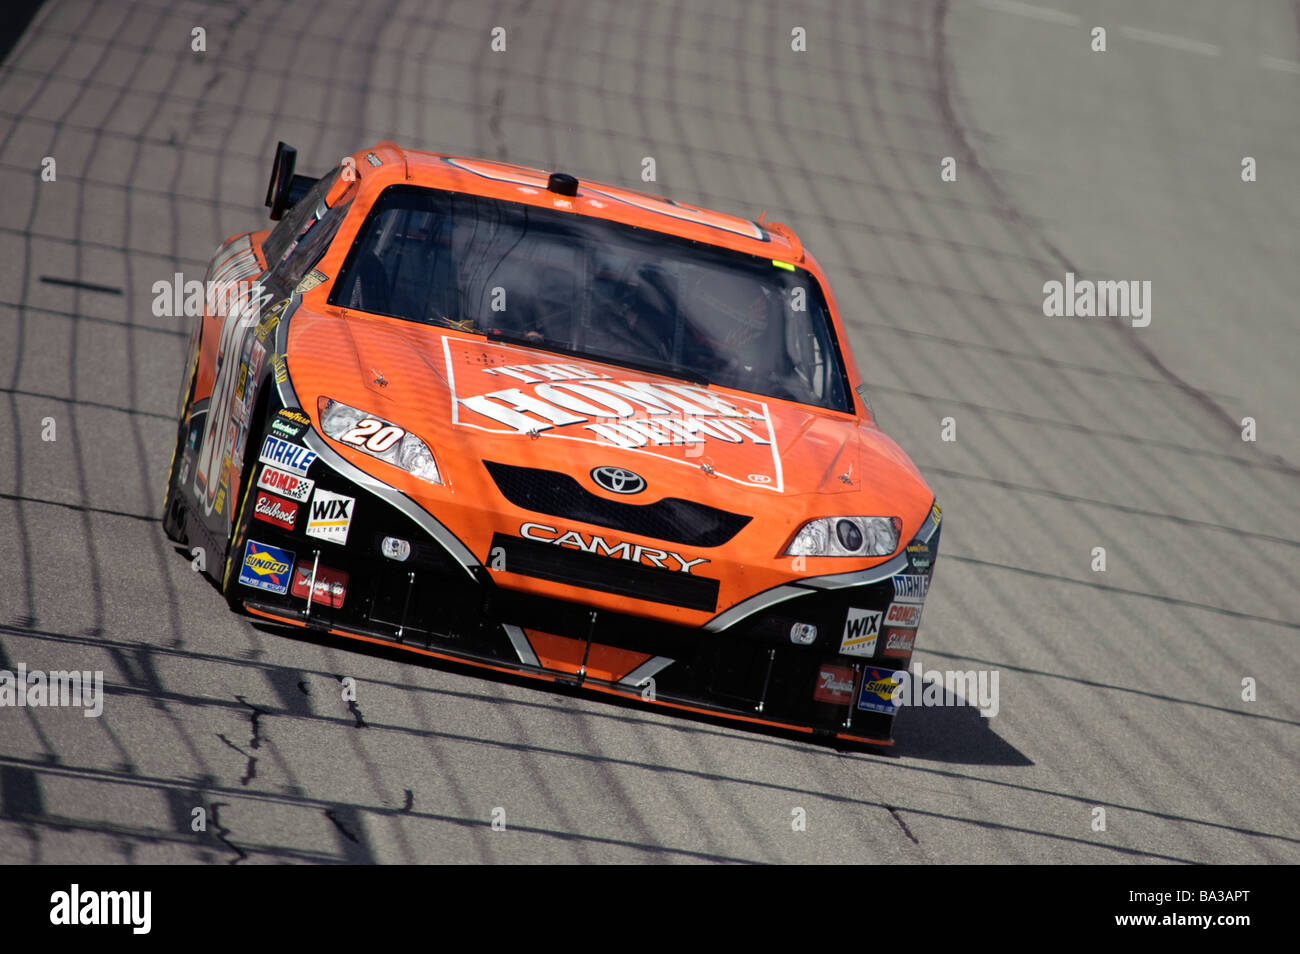 Tony Stewart drives his Home Depot Toyota Camry at the 3M Performance 400 at Michigan International Speedway 2008 Stock Photo